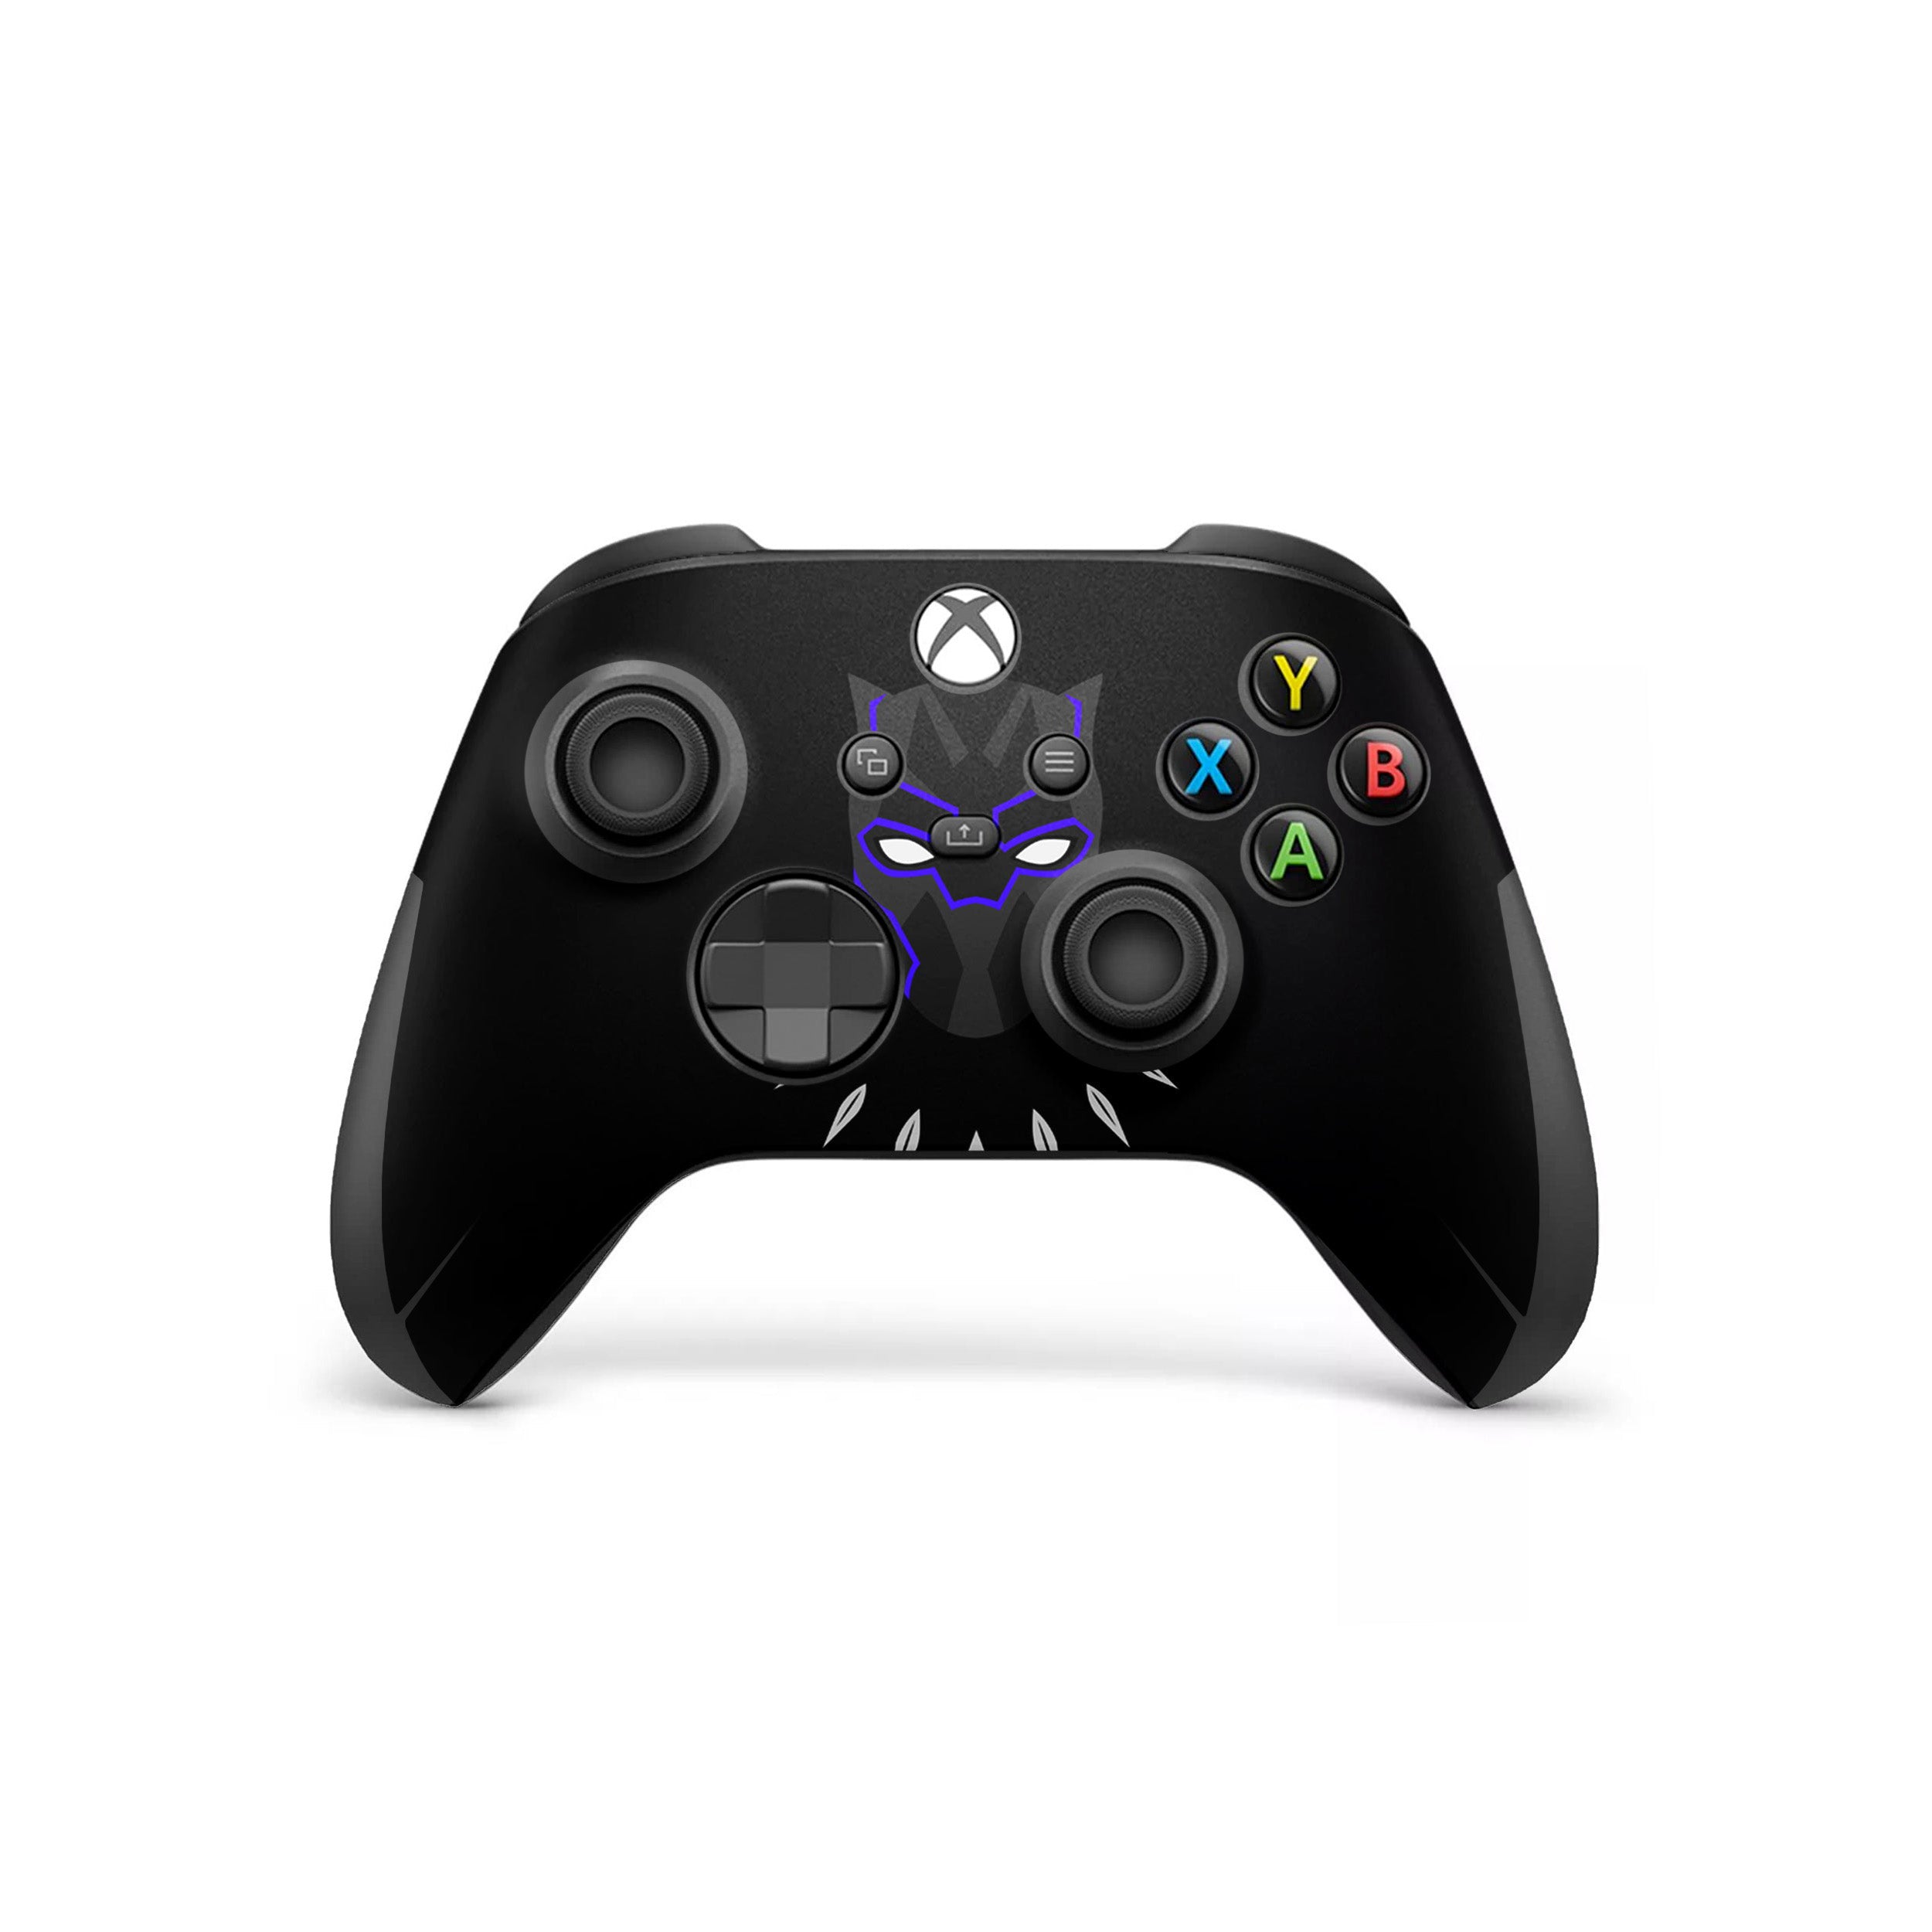 A video game skin featuring a Marvel Comics Black Panther design for the Xbox Wireless Controller.